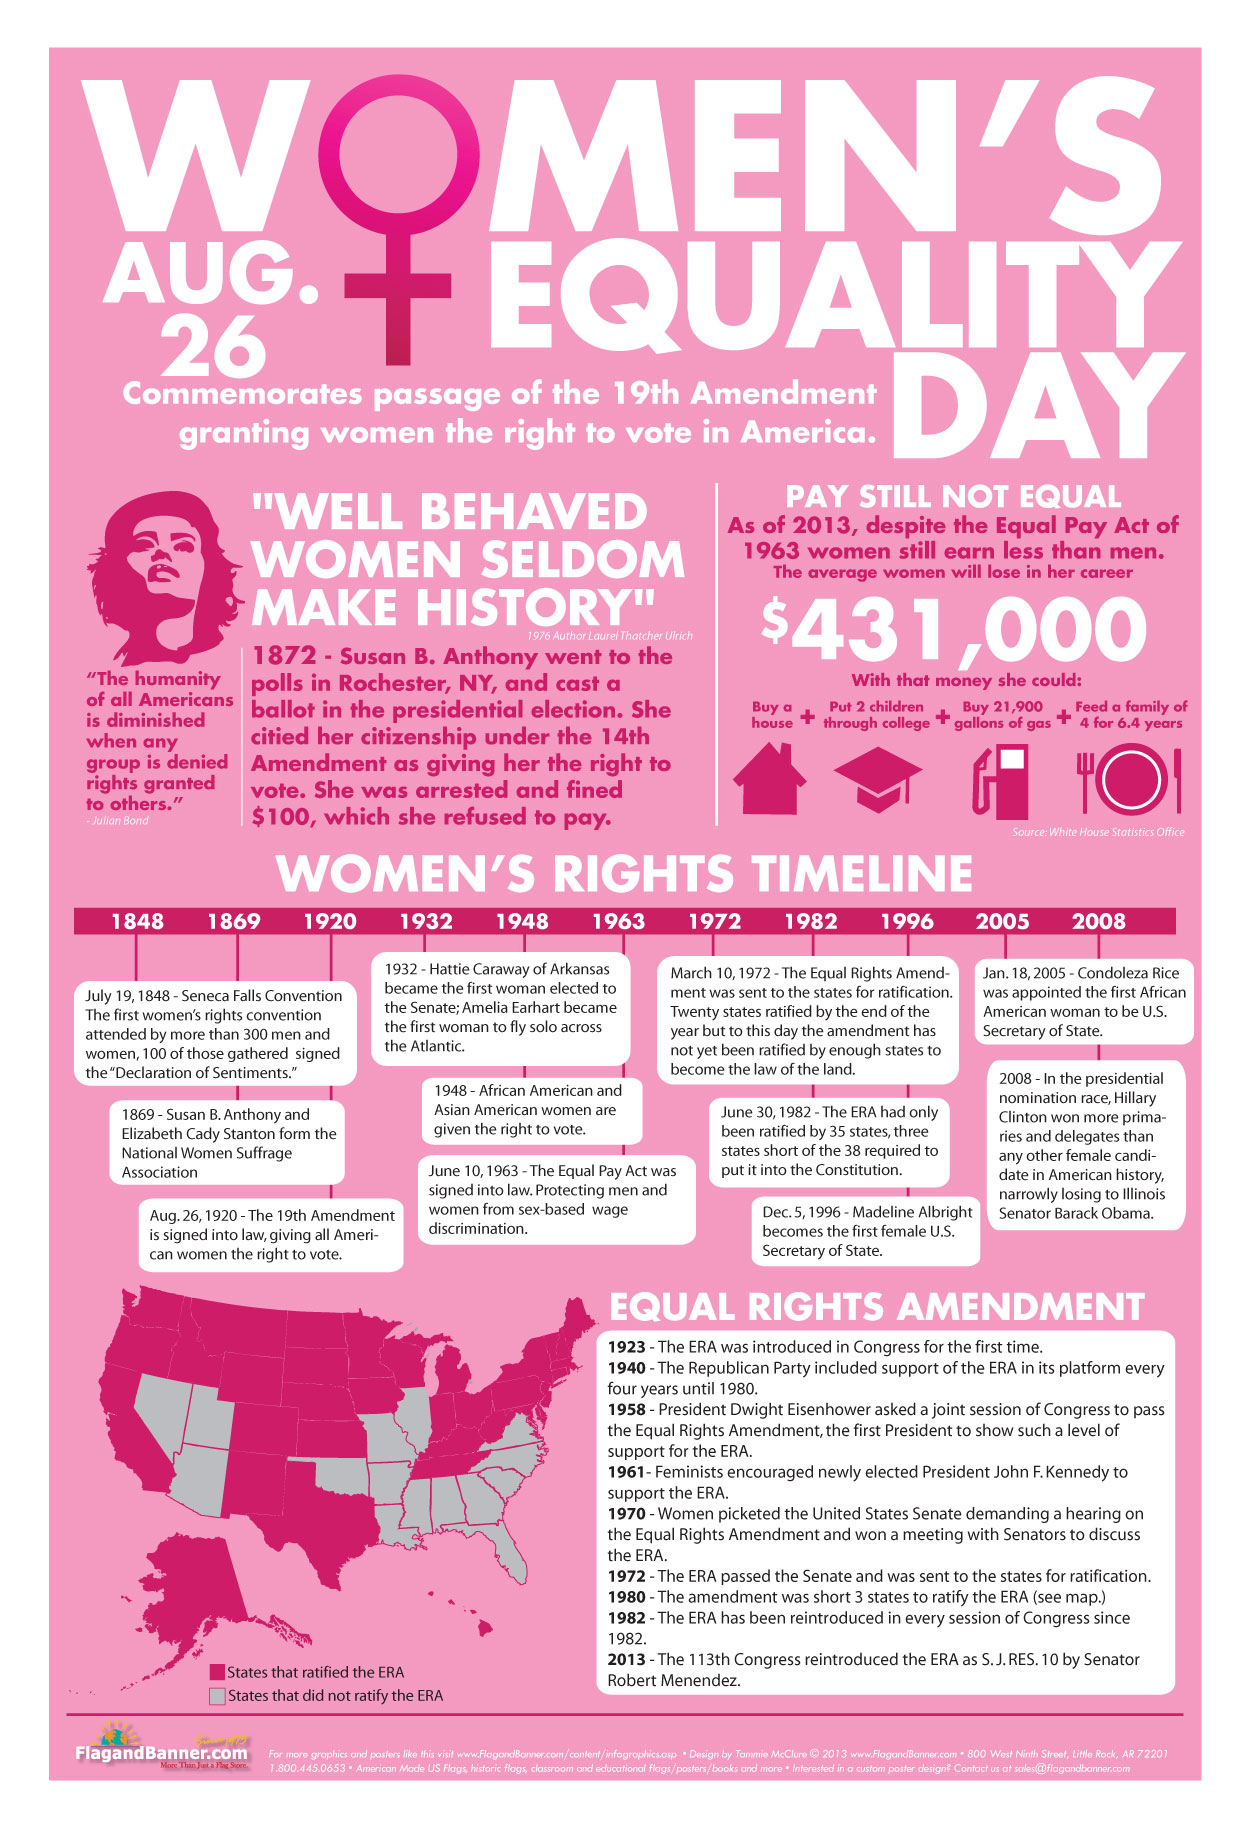 Women's Equality Day August 26th Poster Image